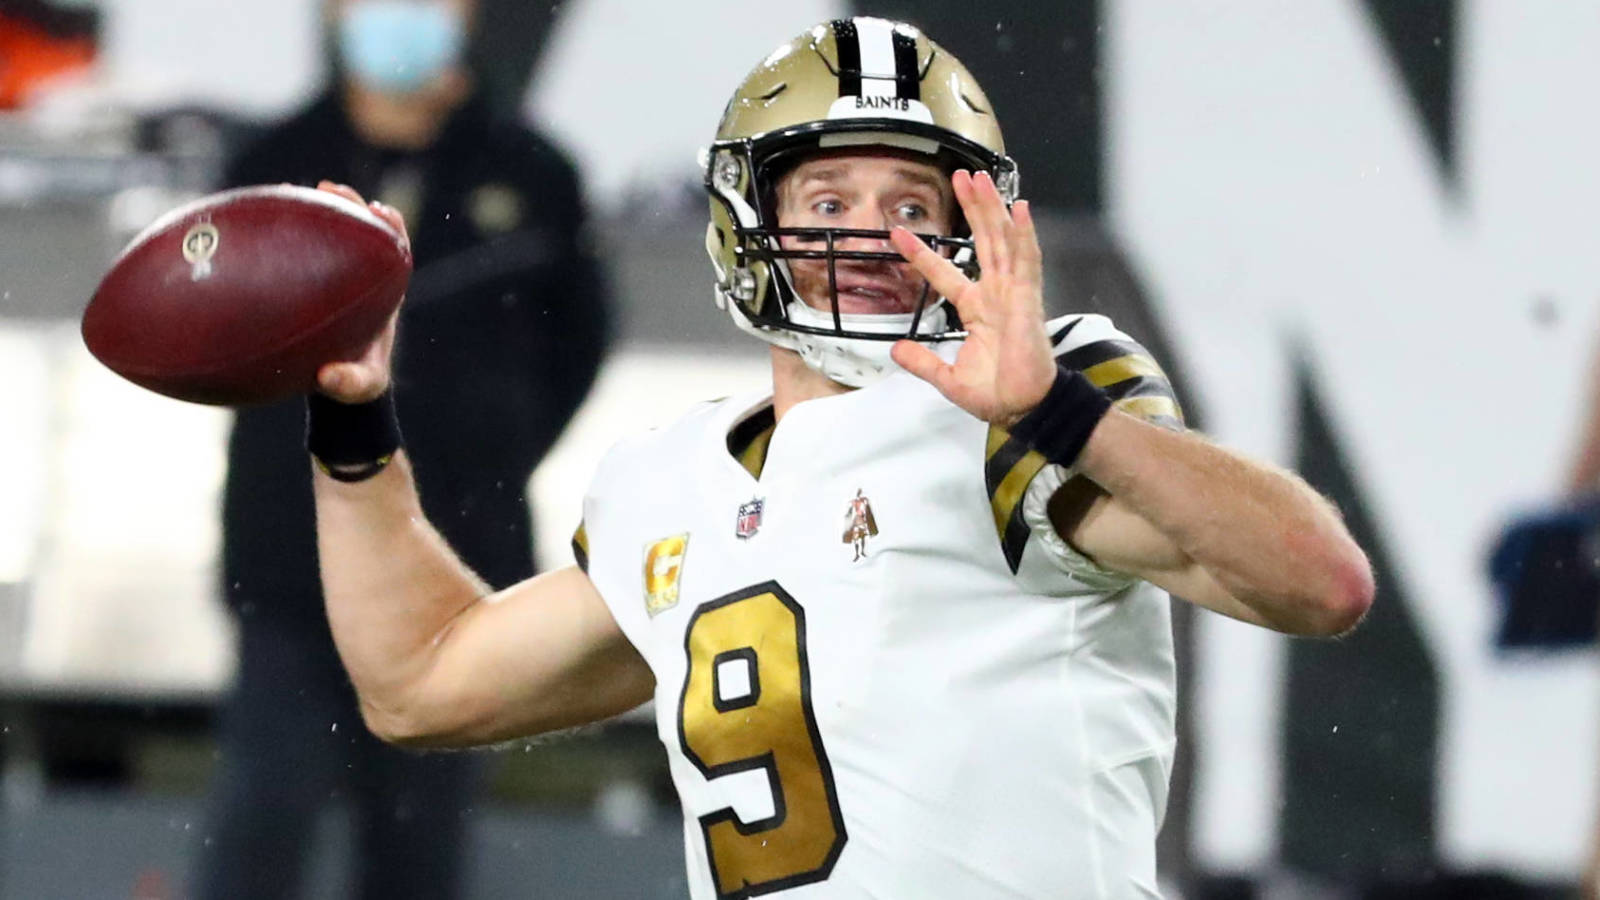 Drew Brees Broken Ribs / Drew Brees Injury And Latest Recovery Timeline